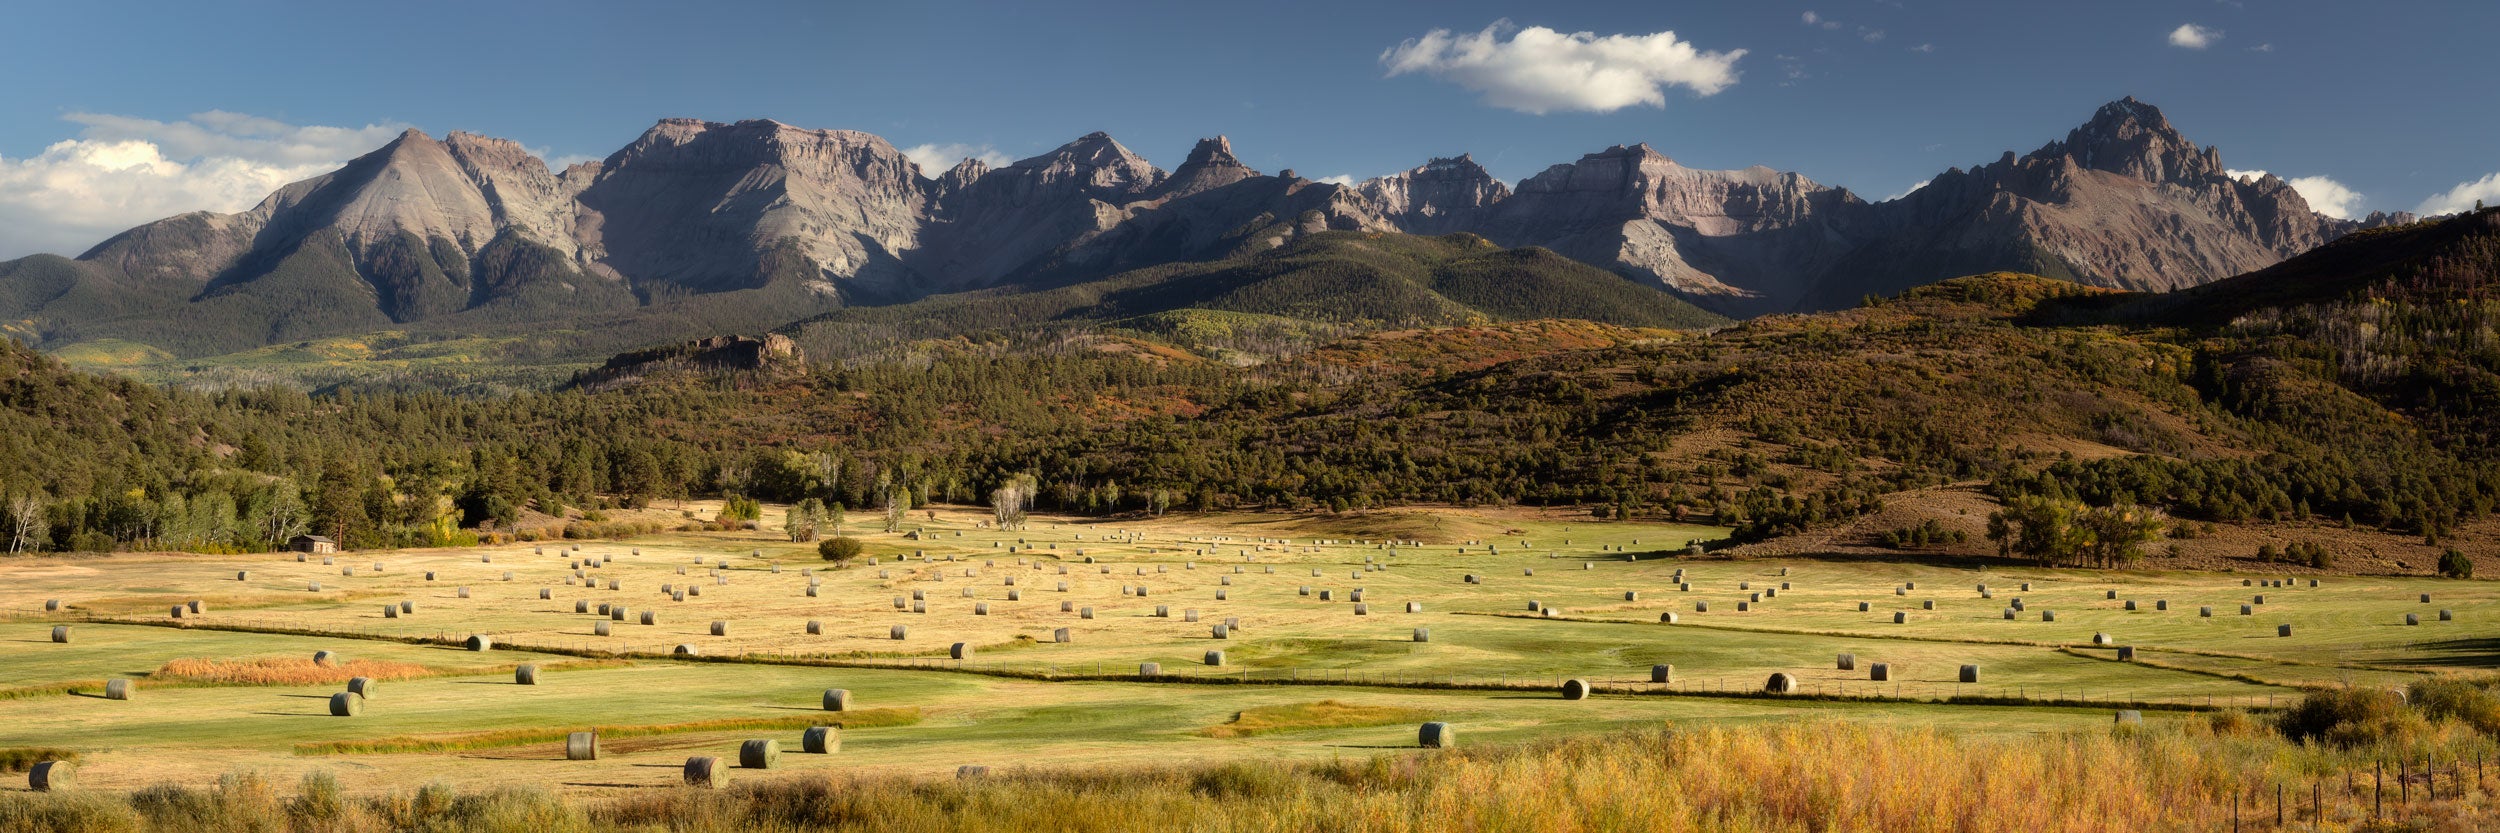 A Lars Gesing fine art nature image of the Ralph Lauren Double R ranch near Ridgway in Colorado's San Juan Mountains, with Mount Sneffels in the back, during fall color season. The best time to see the fall colors in Colorado is usually late September and early October.